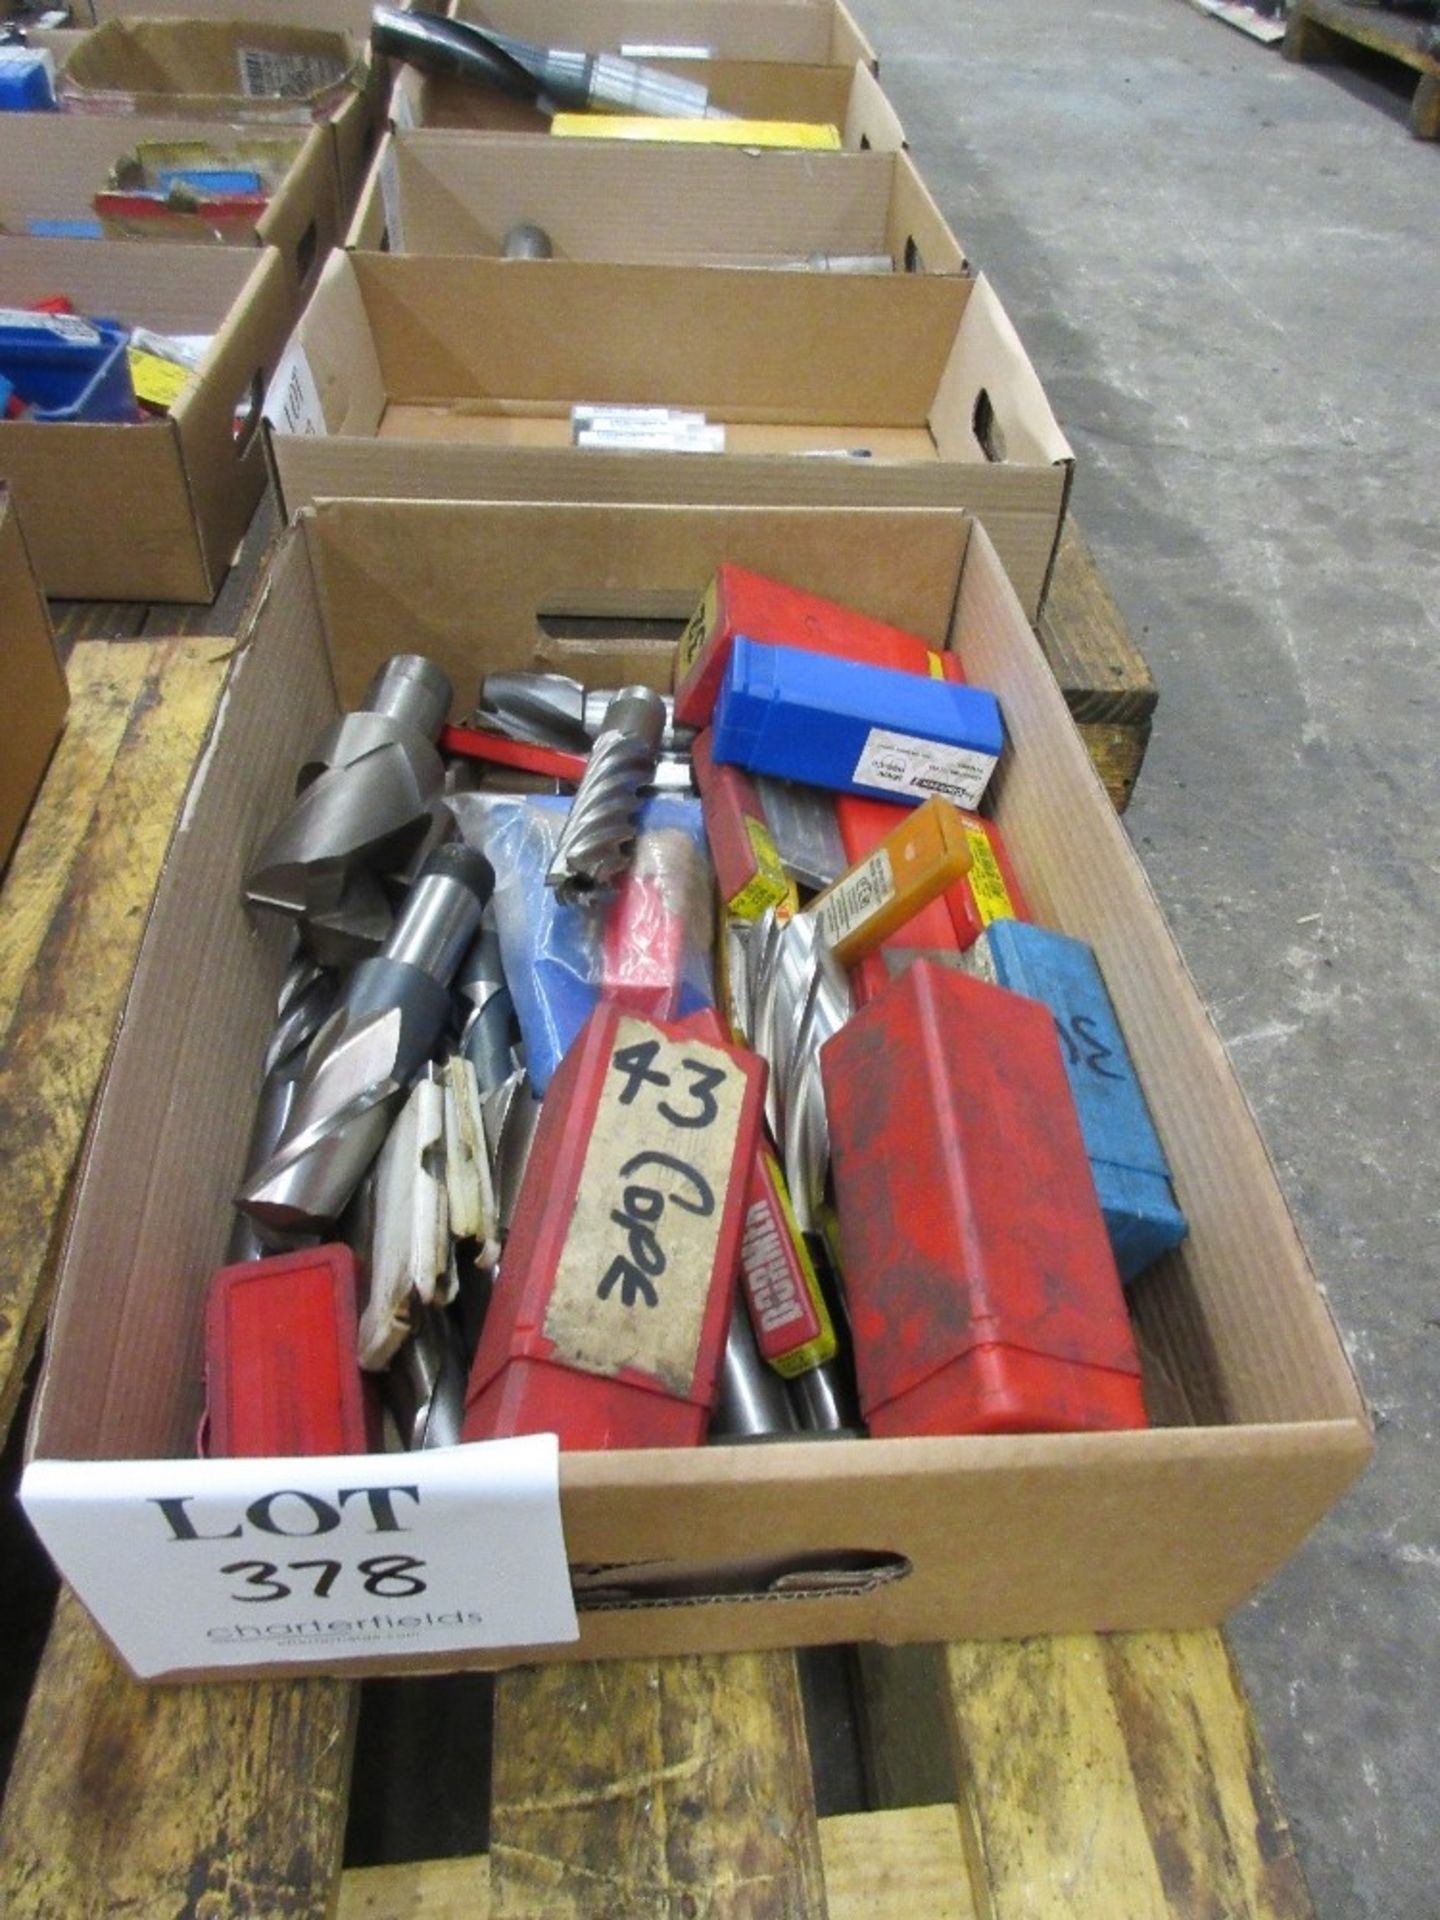 Box of various milling cutters